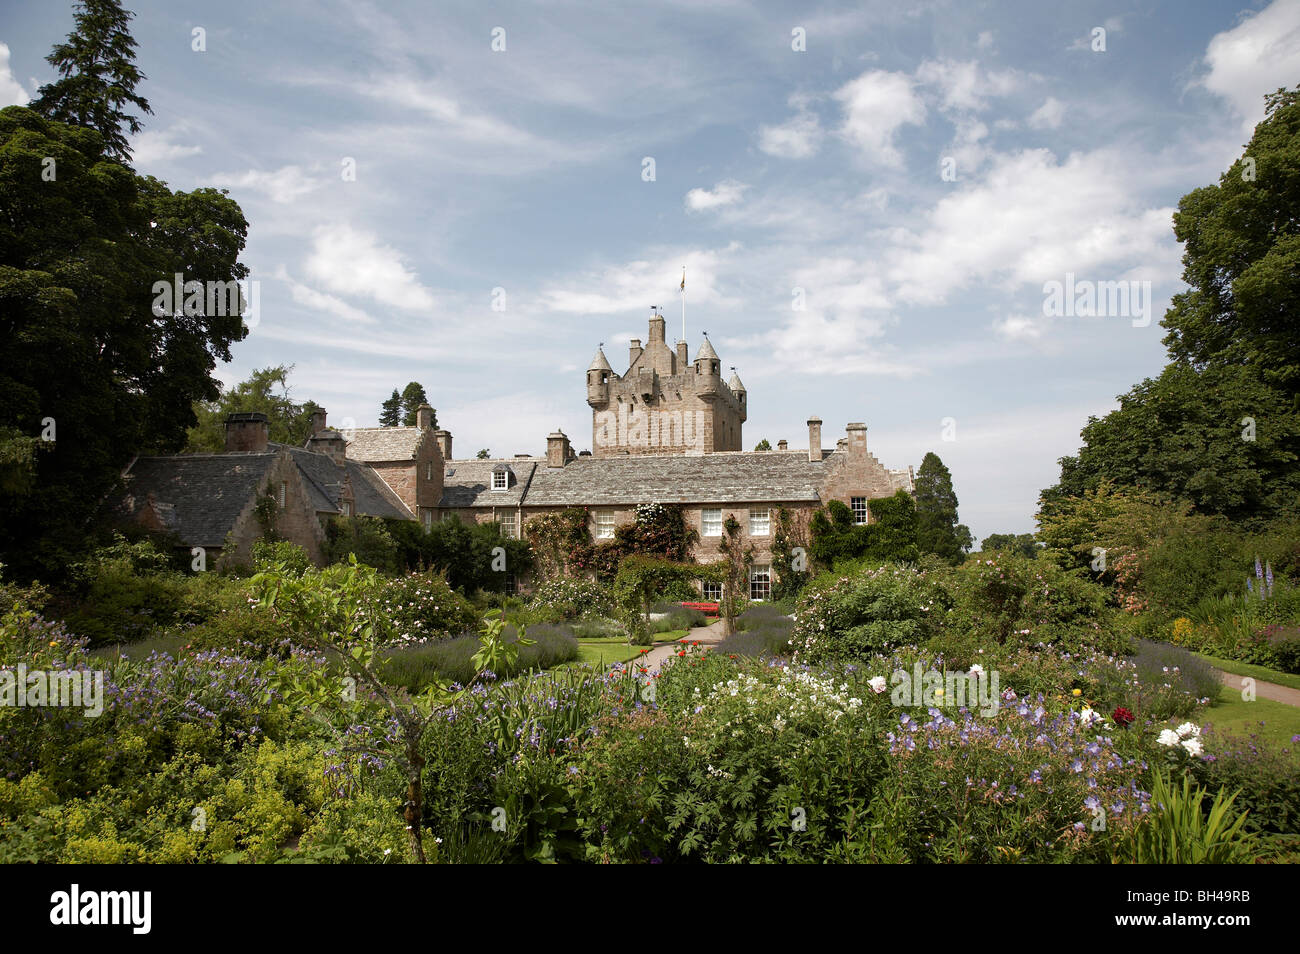 Cawdor castle and gardens in Nairn. Stock Photo